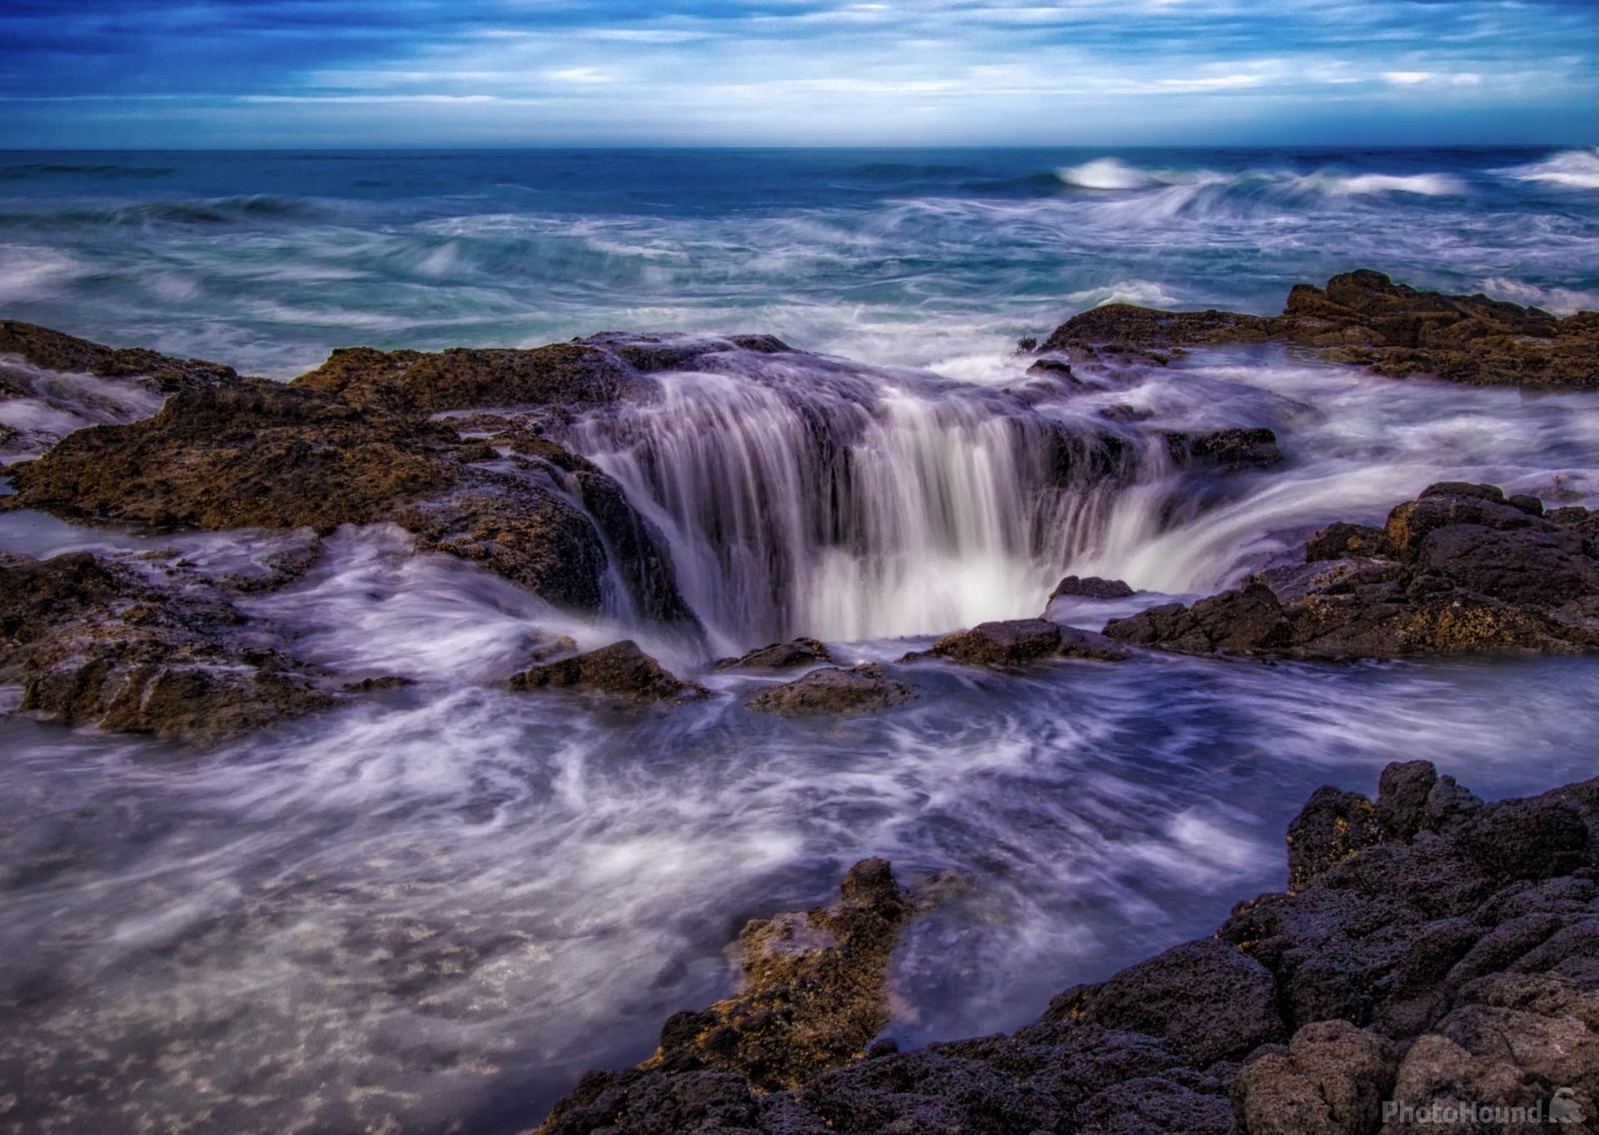 Image of Cape Perpetua Scenic Area by Ray Hull